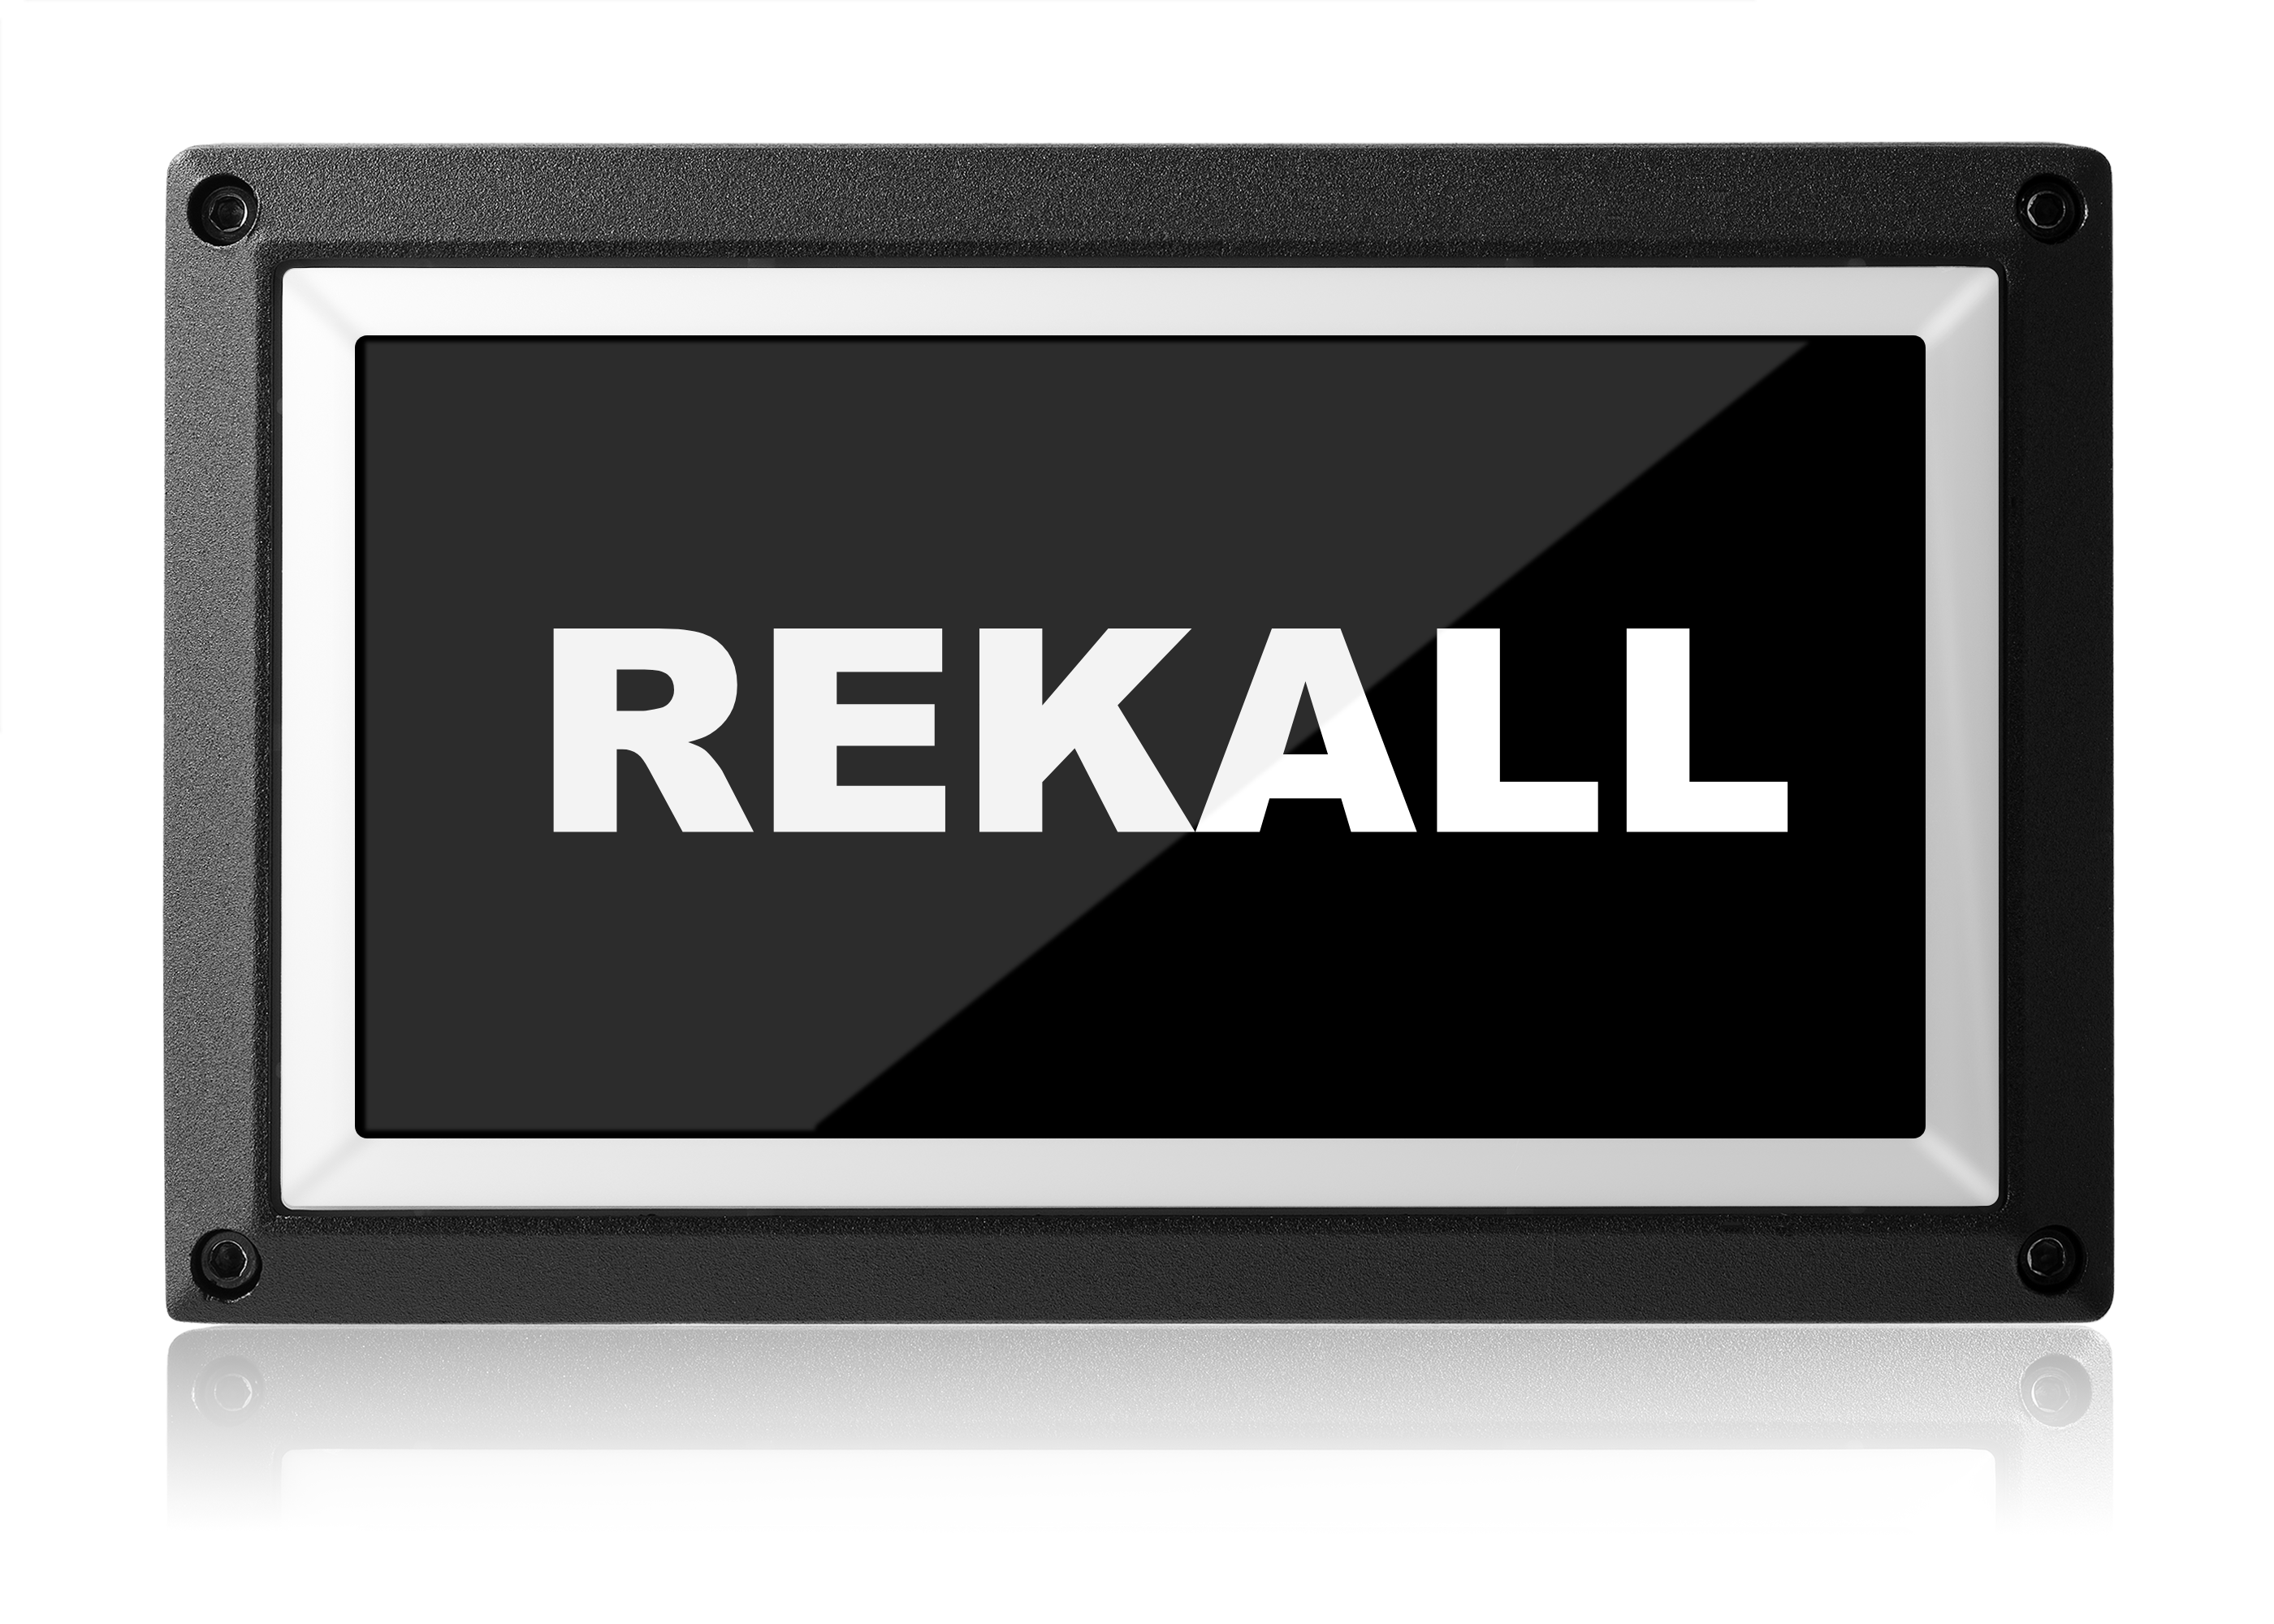 For Official Use Only In Use Light - FOUO - Rekall Dynamics LED Sign-